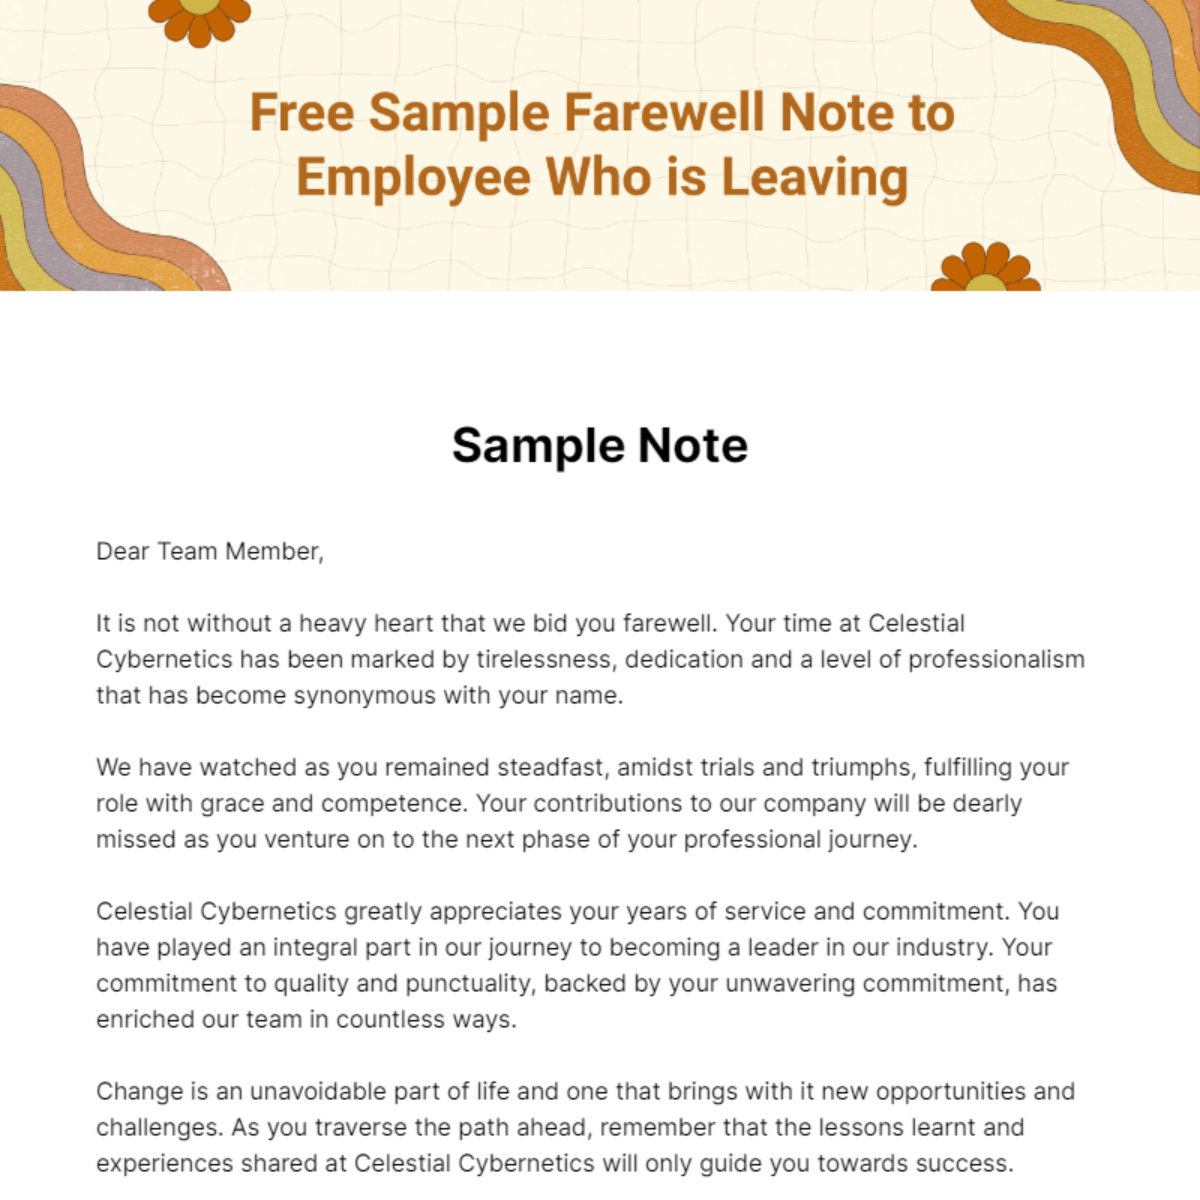 Sample Farewell Note to Employee Who is Leaving Template